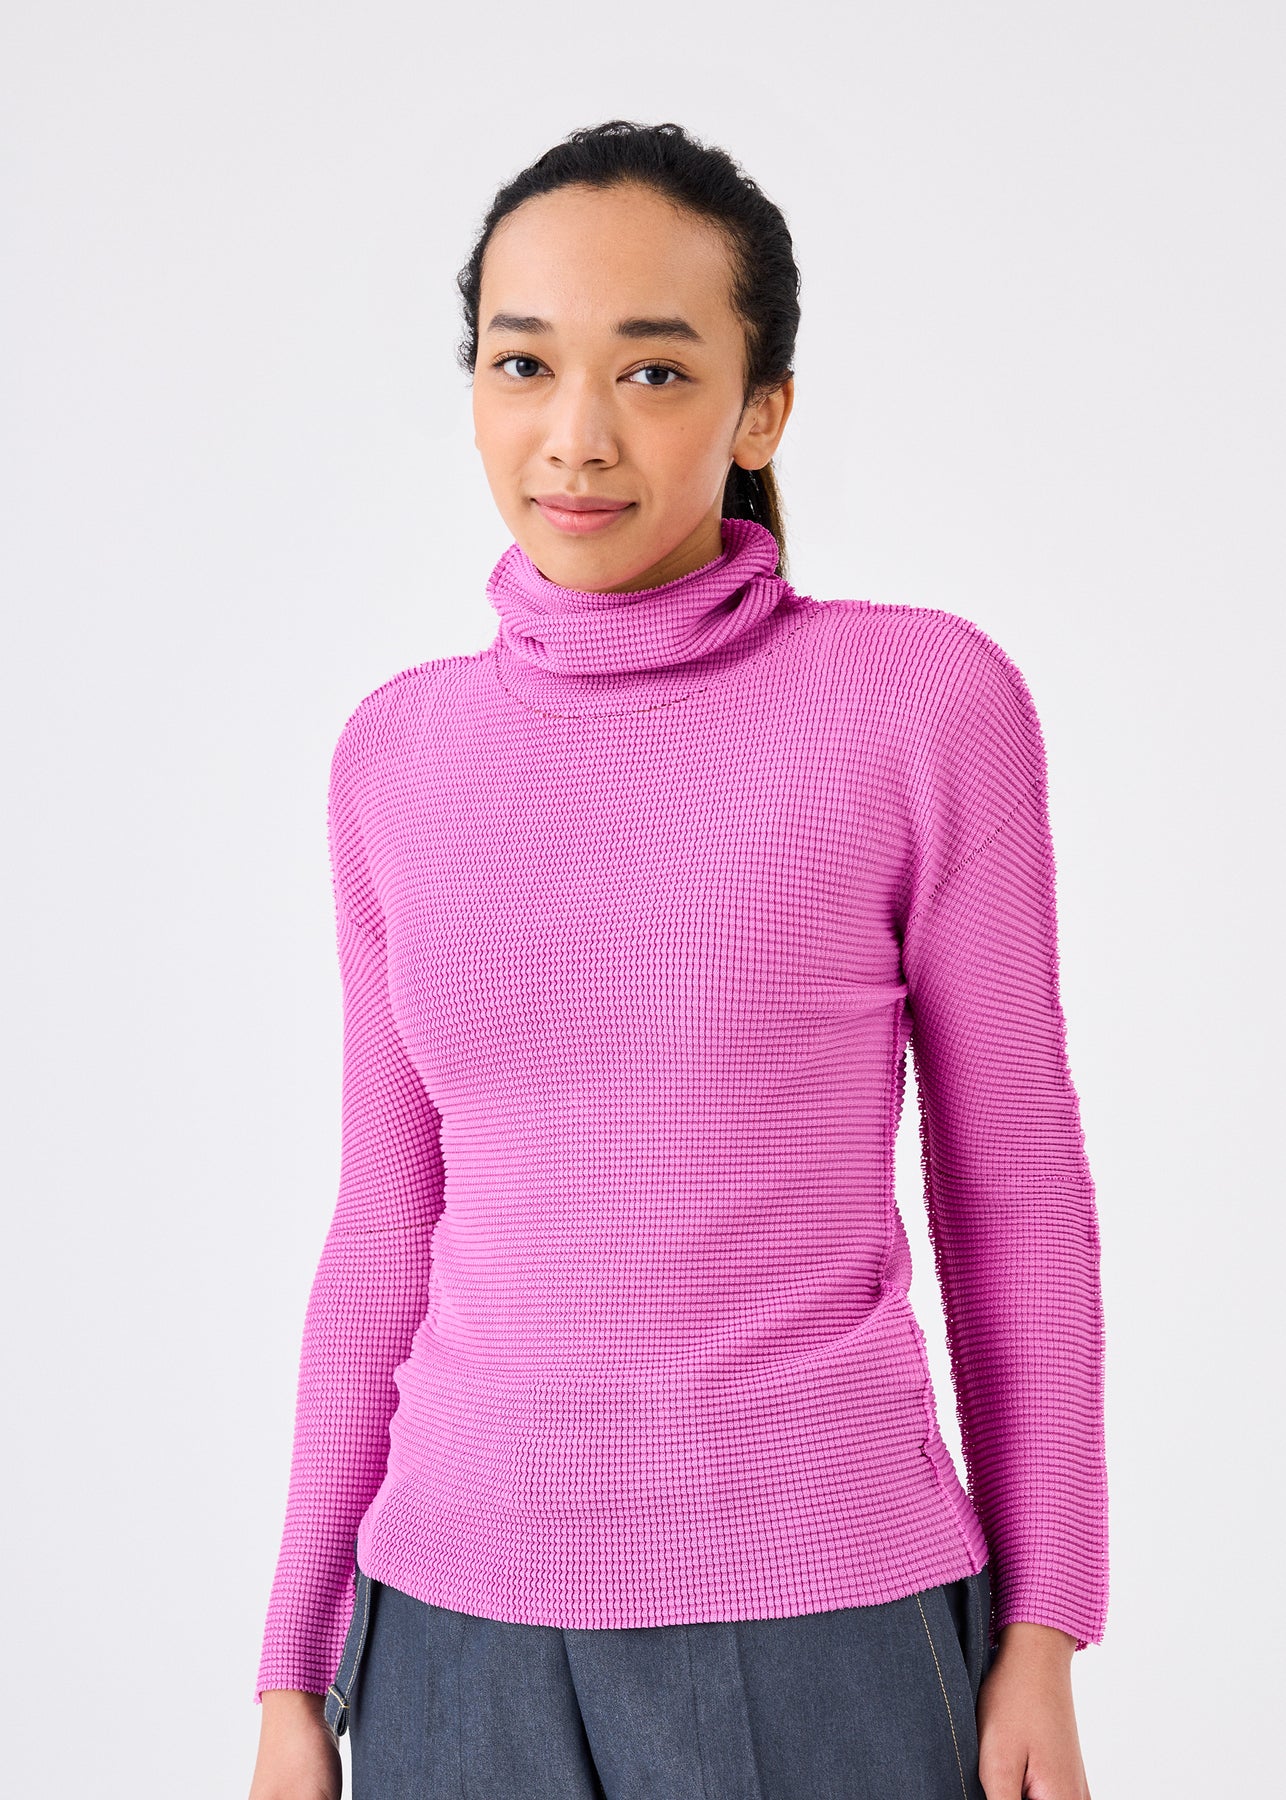 KNIT STRETCH PLEATS 1 TOP | The official ISSEY MIYAKE ONLINE STORE